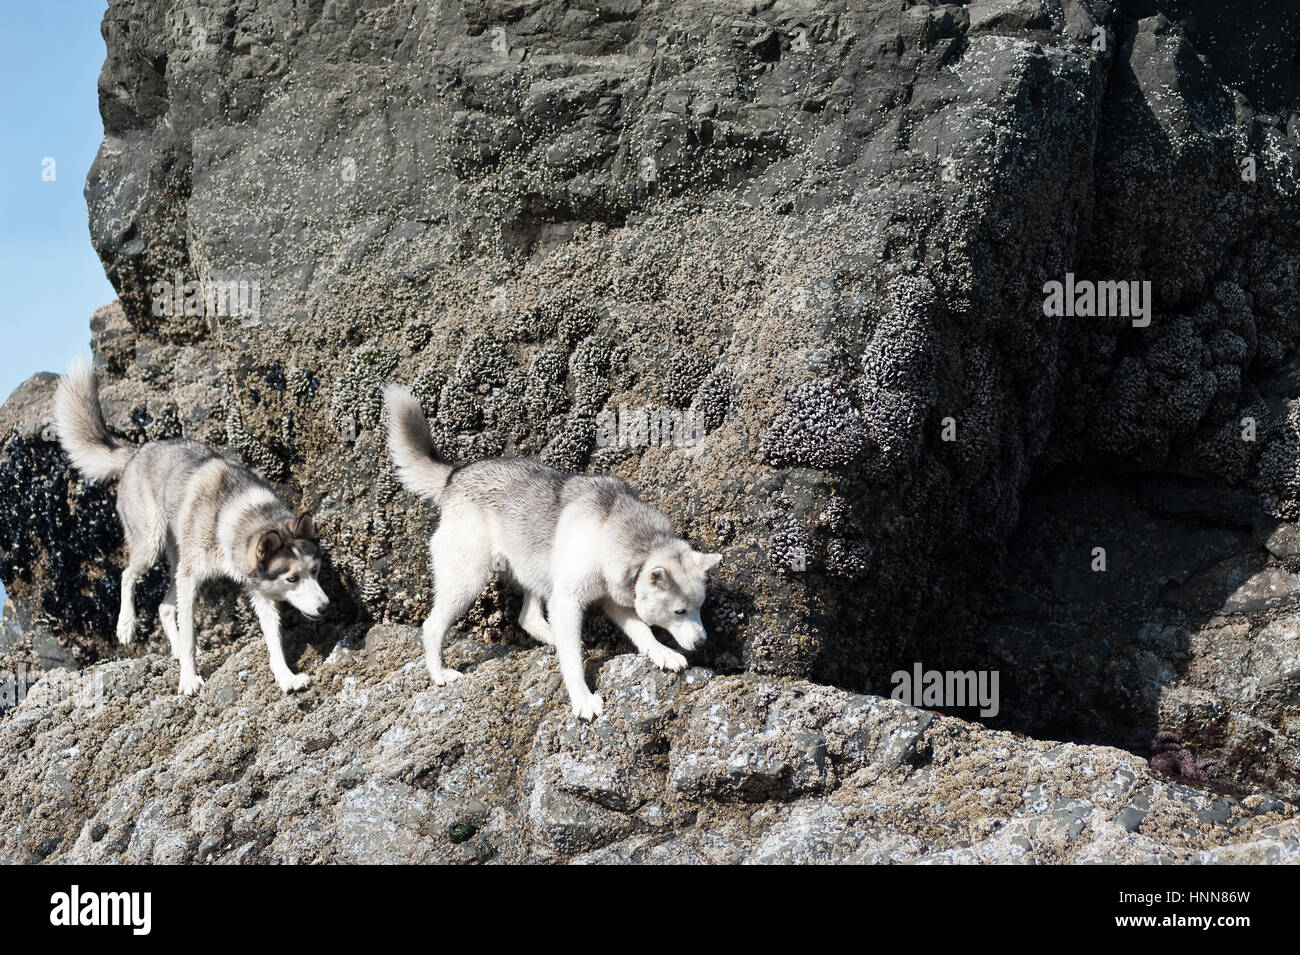 huskies dogs walking safely  in cliffs  in Ruby Beach, Olympic National Park,Washington State, USA Stock Photo